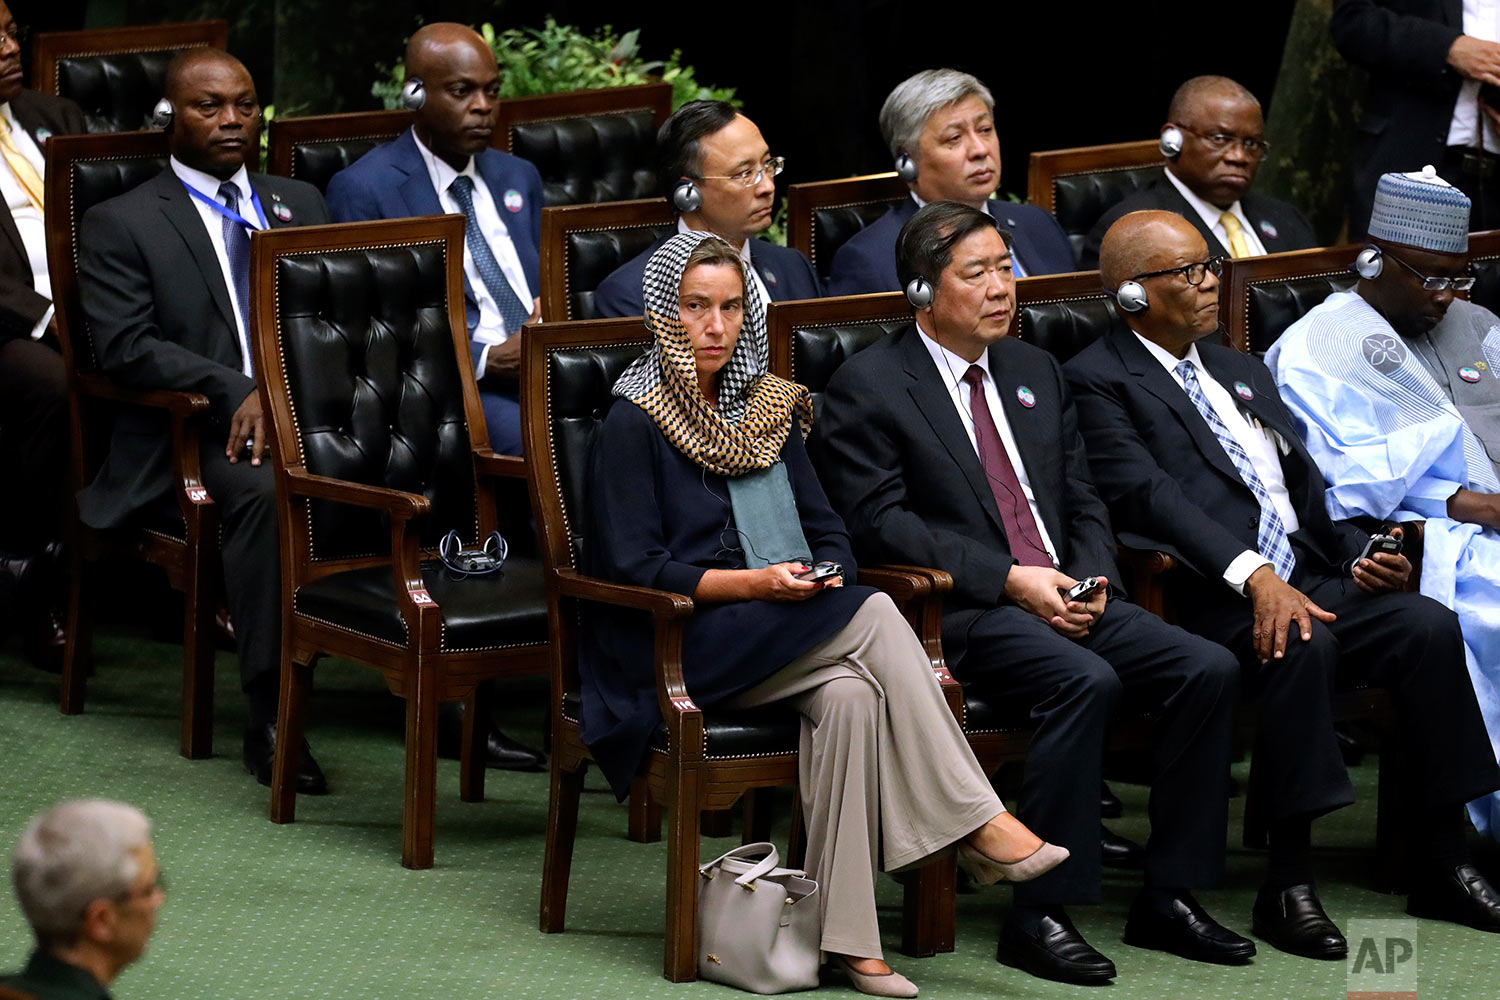  European Union foreign policy chief Federica Mogherini, left, attends the swearing-in ceremony of President Hasan Rouhani for the second term in office, at the parliament in Tehran, Iran, Saturday, Aug. 5, 2017. (AP Photo/Ebrahim Noroozi) 